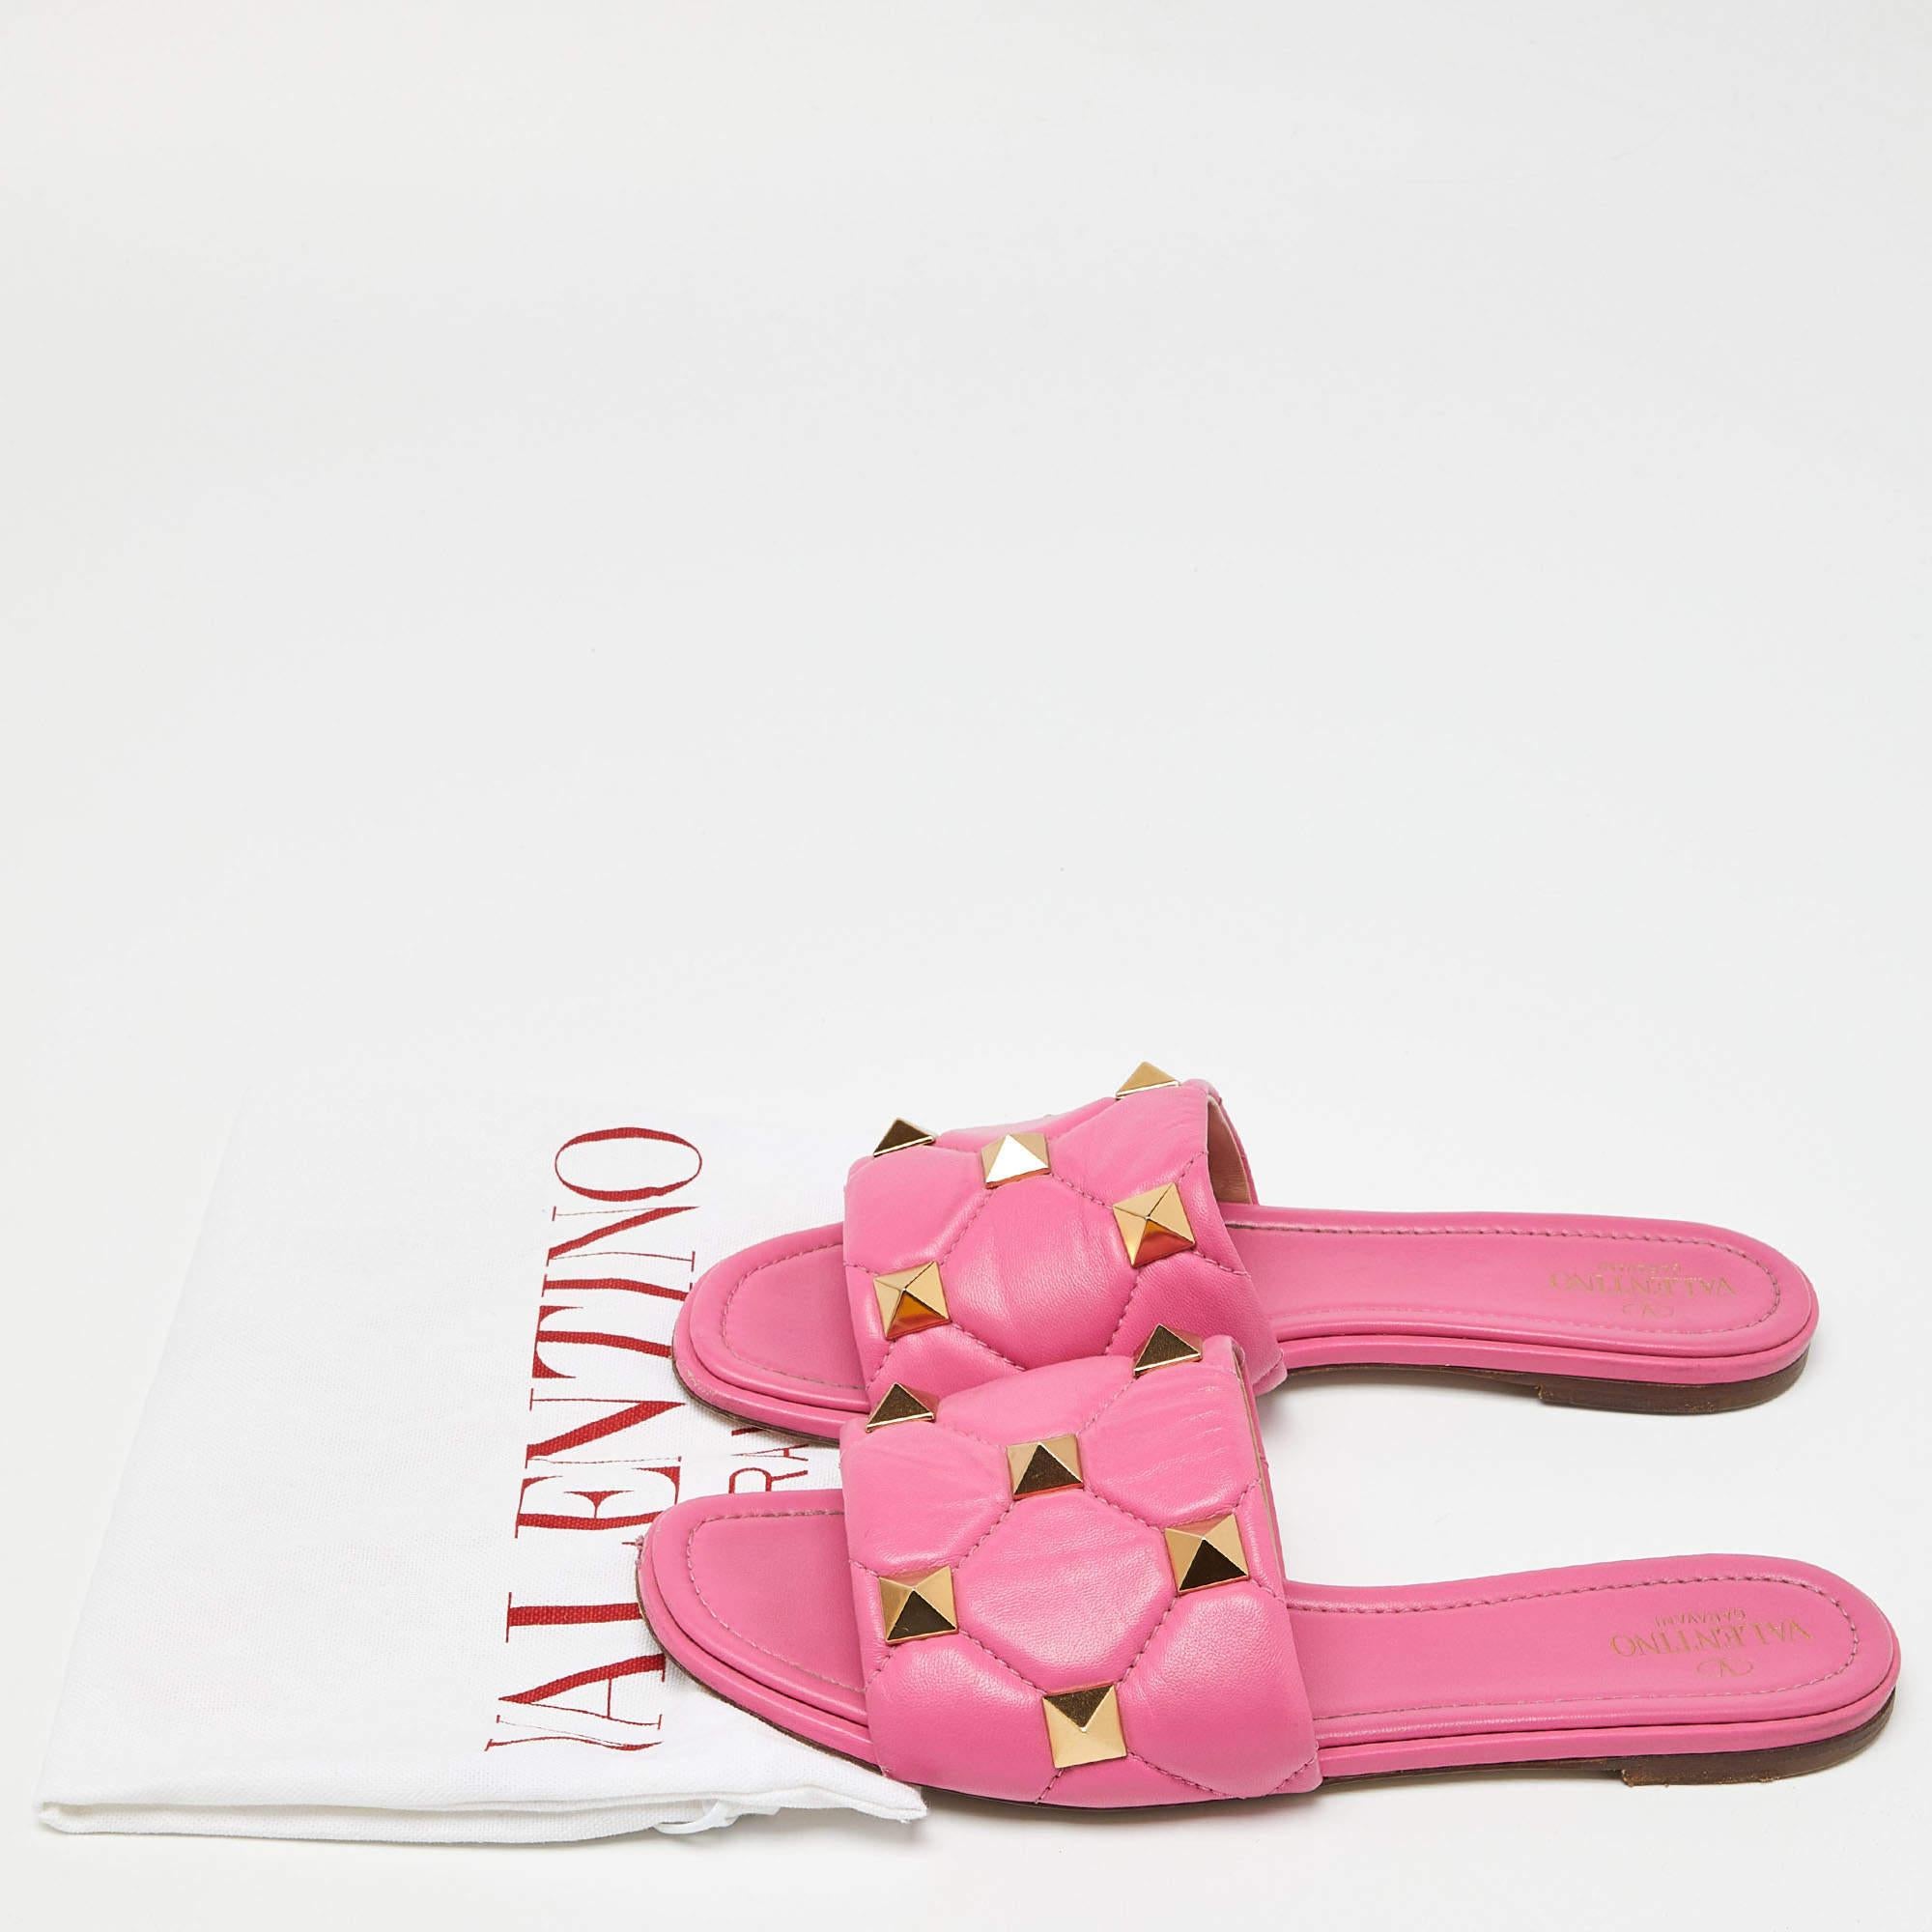 Valentino Pink Quilted Leather Roman Stud Flat Slides Size 41 In Fair Condition For Sale In Dubai, Al Qouz 2